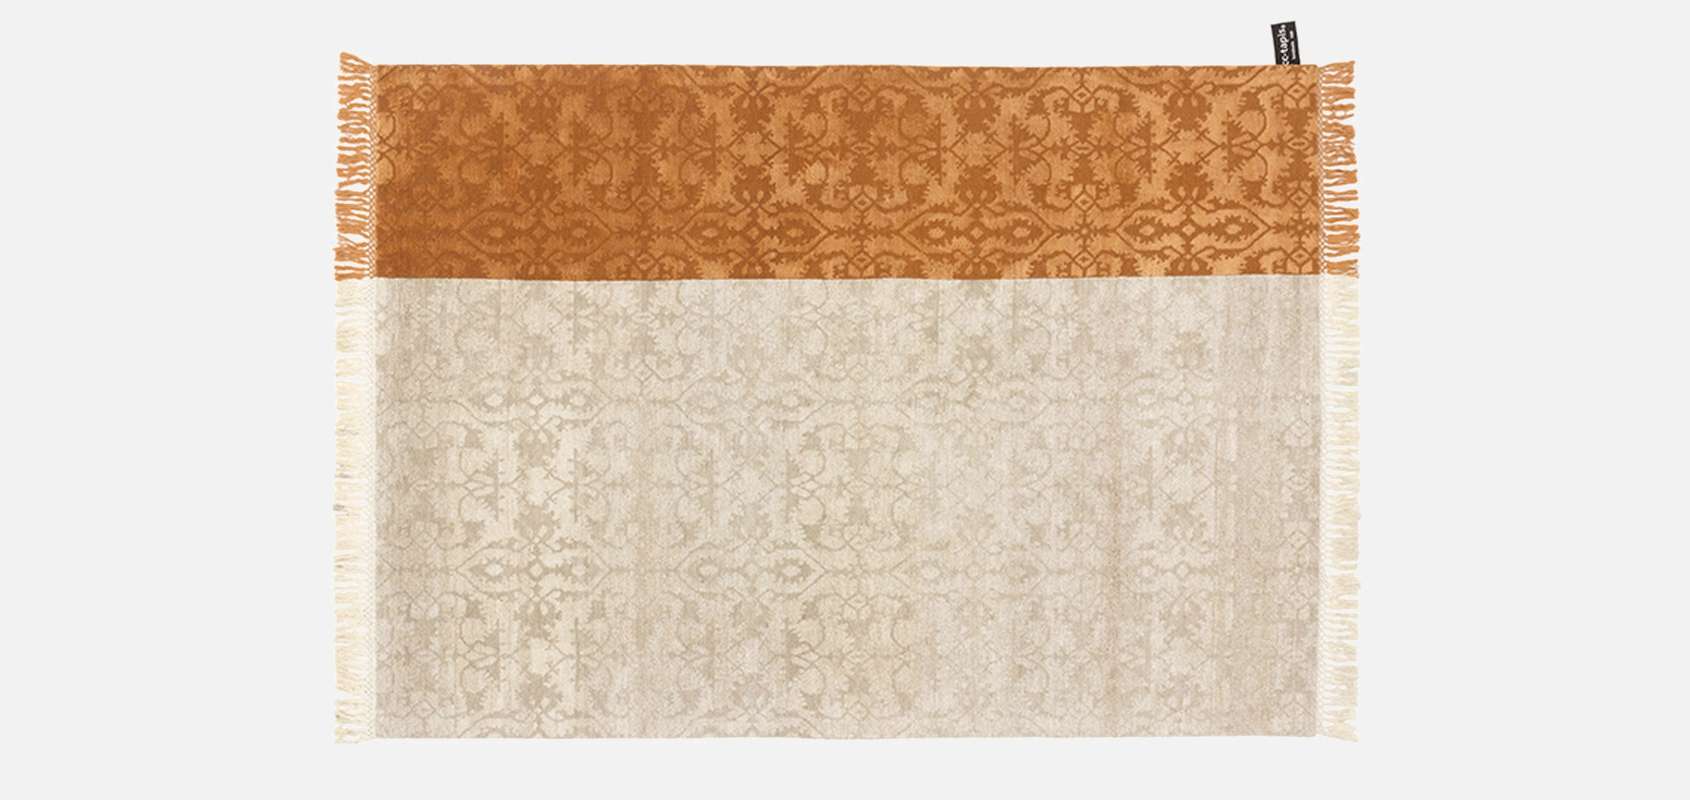 Dipped Lotto Rug - Copper